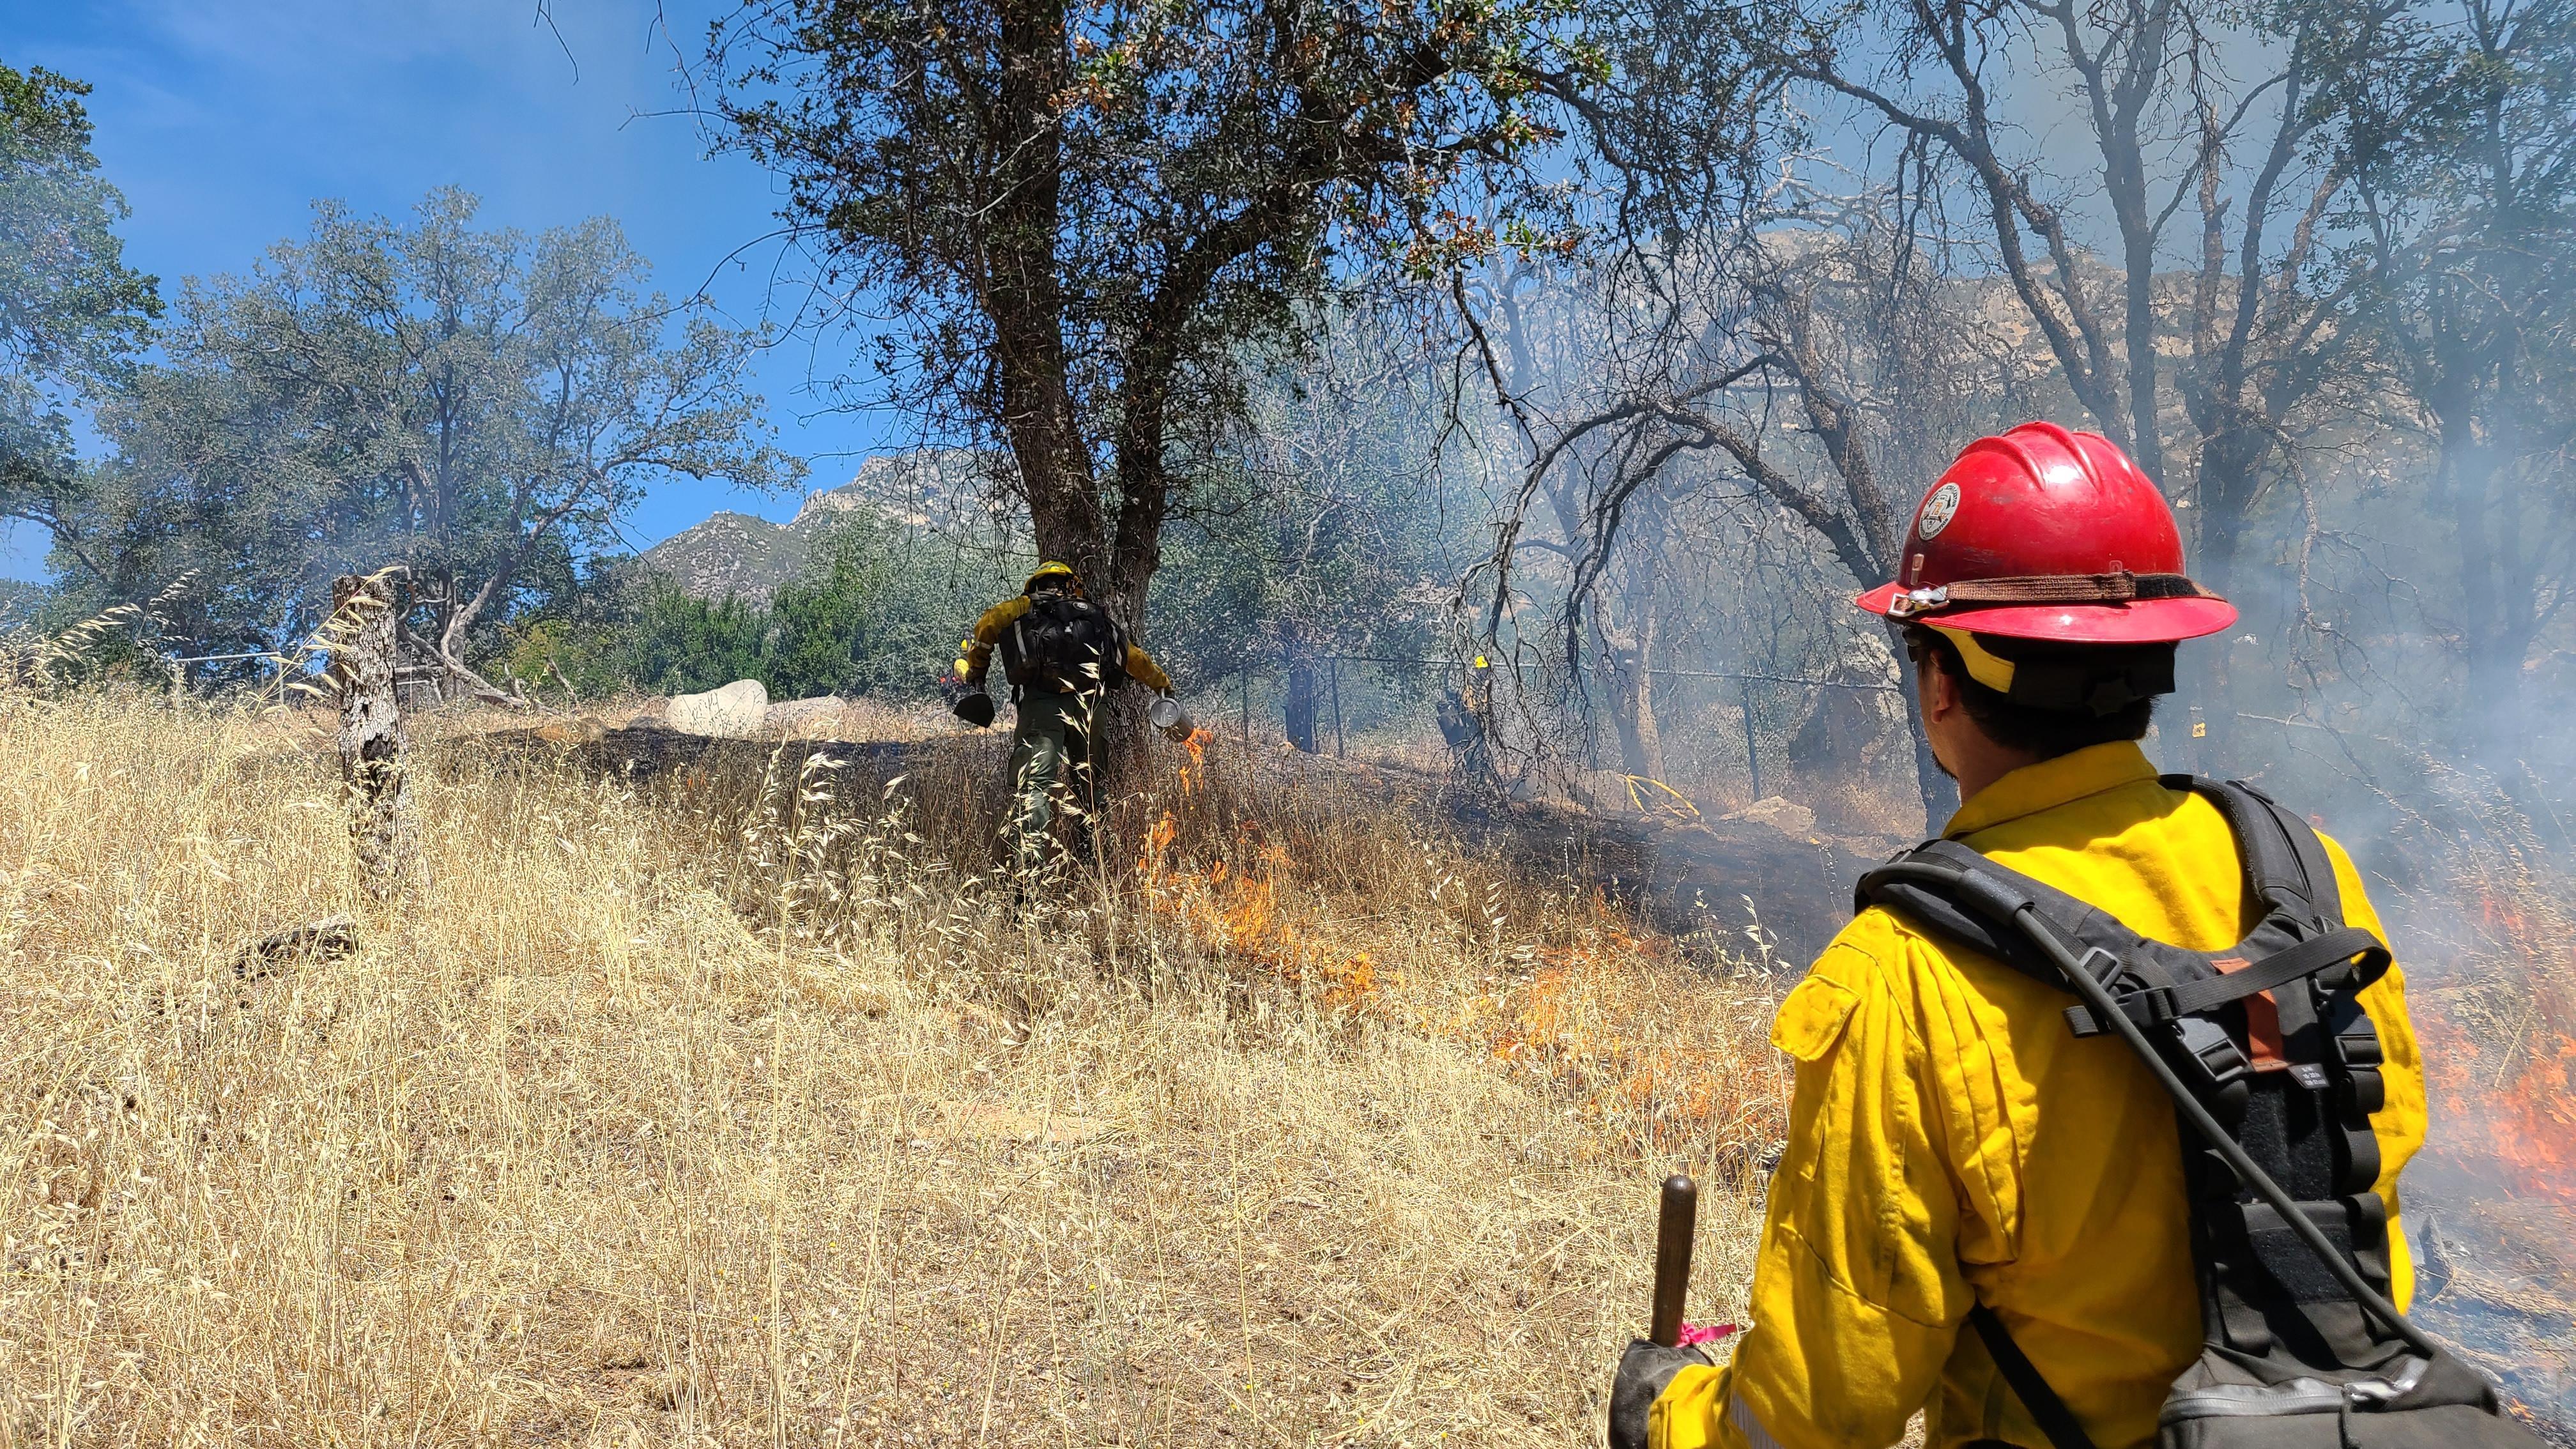 A firefighter in a red helmet looks at another firefighter working under a tree.